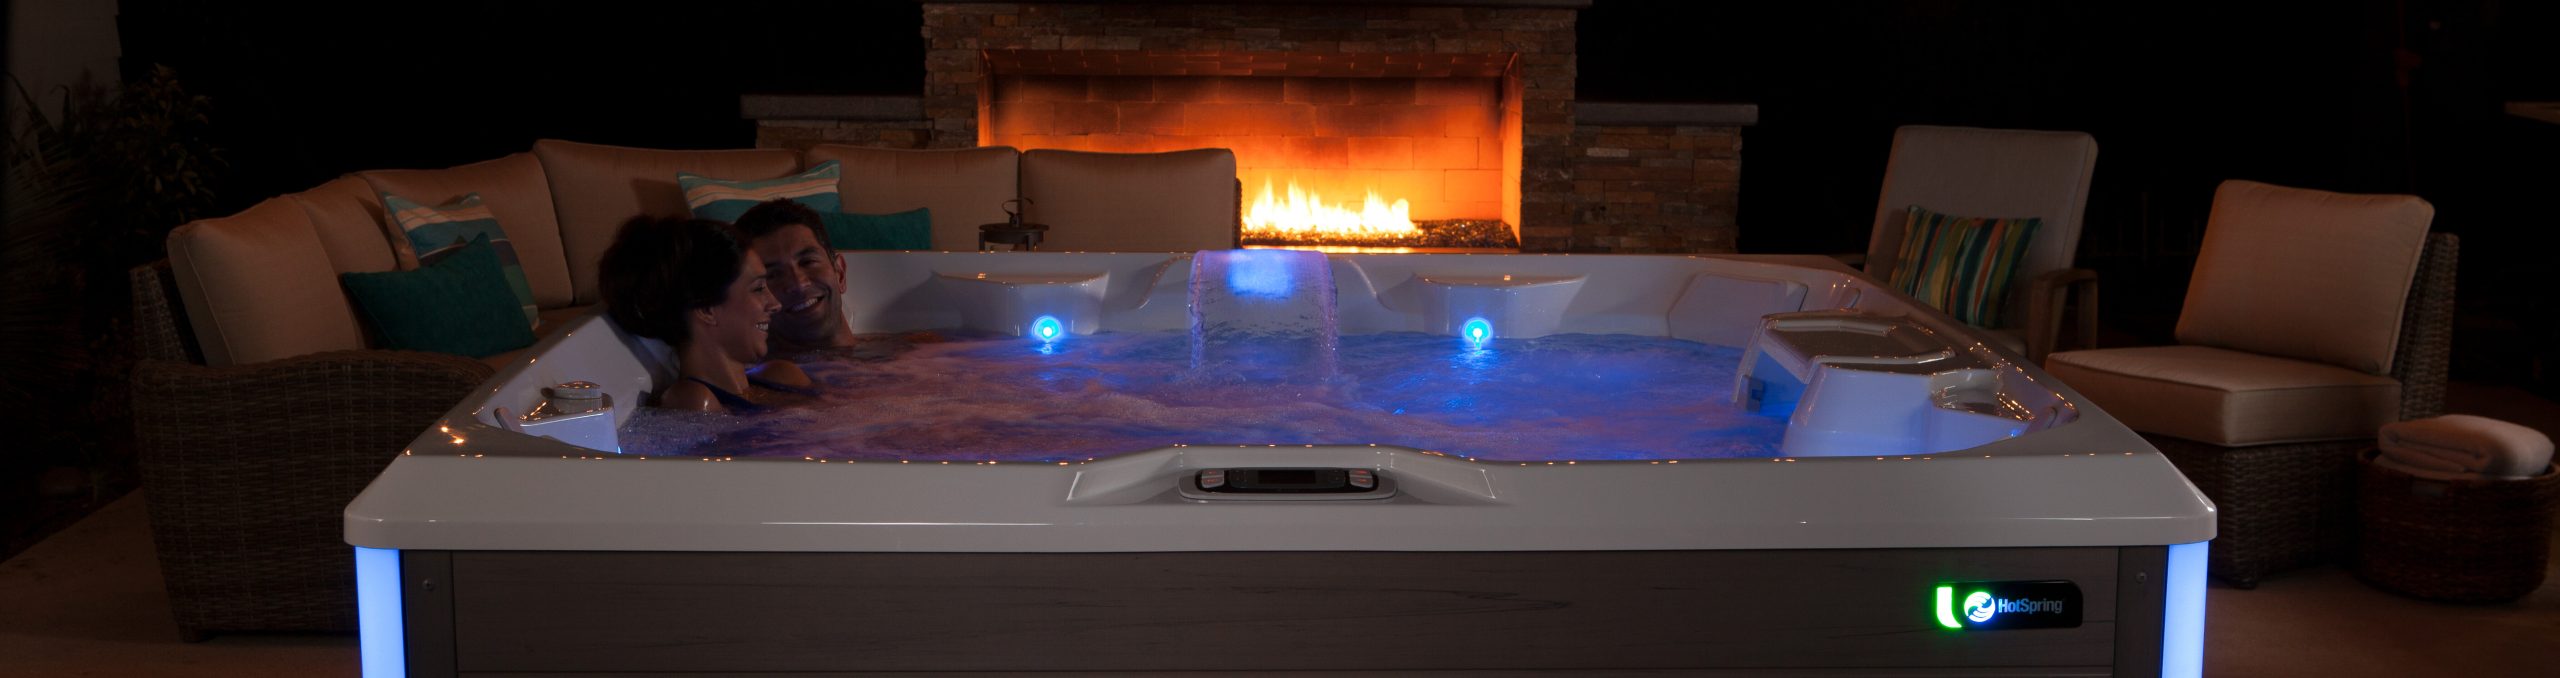 Inventory Clearance Hot Tub Sale